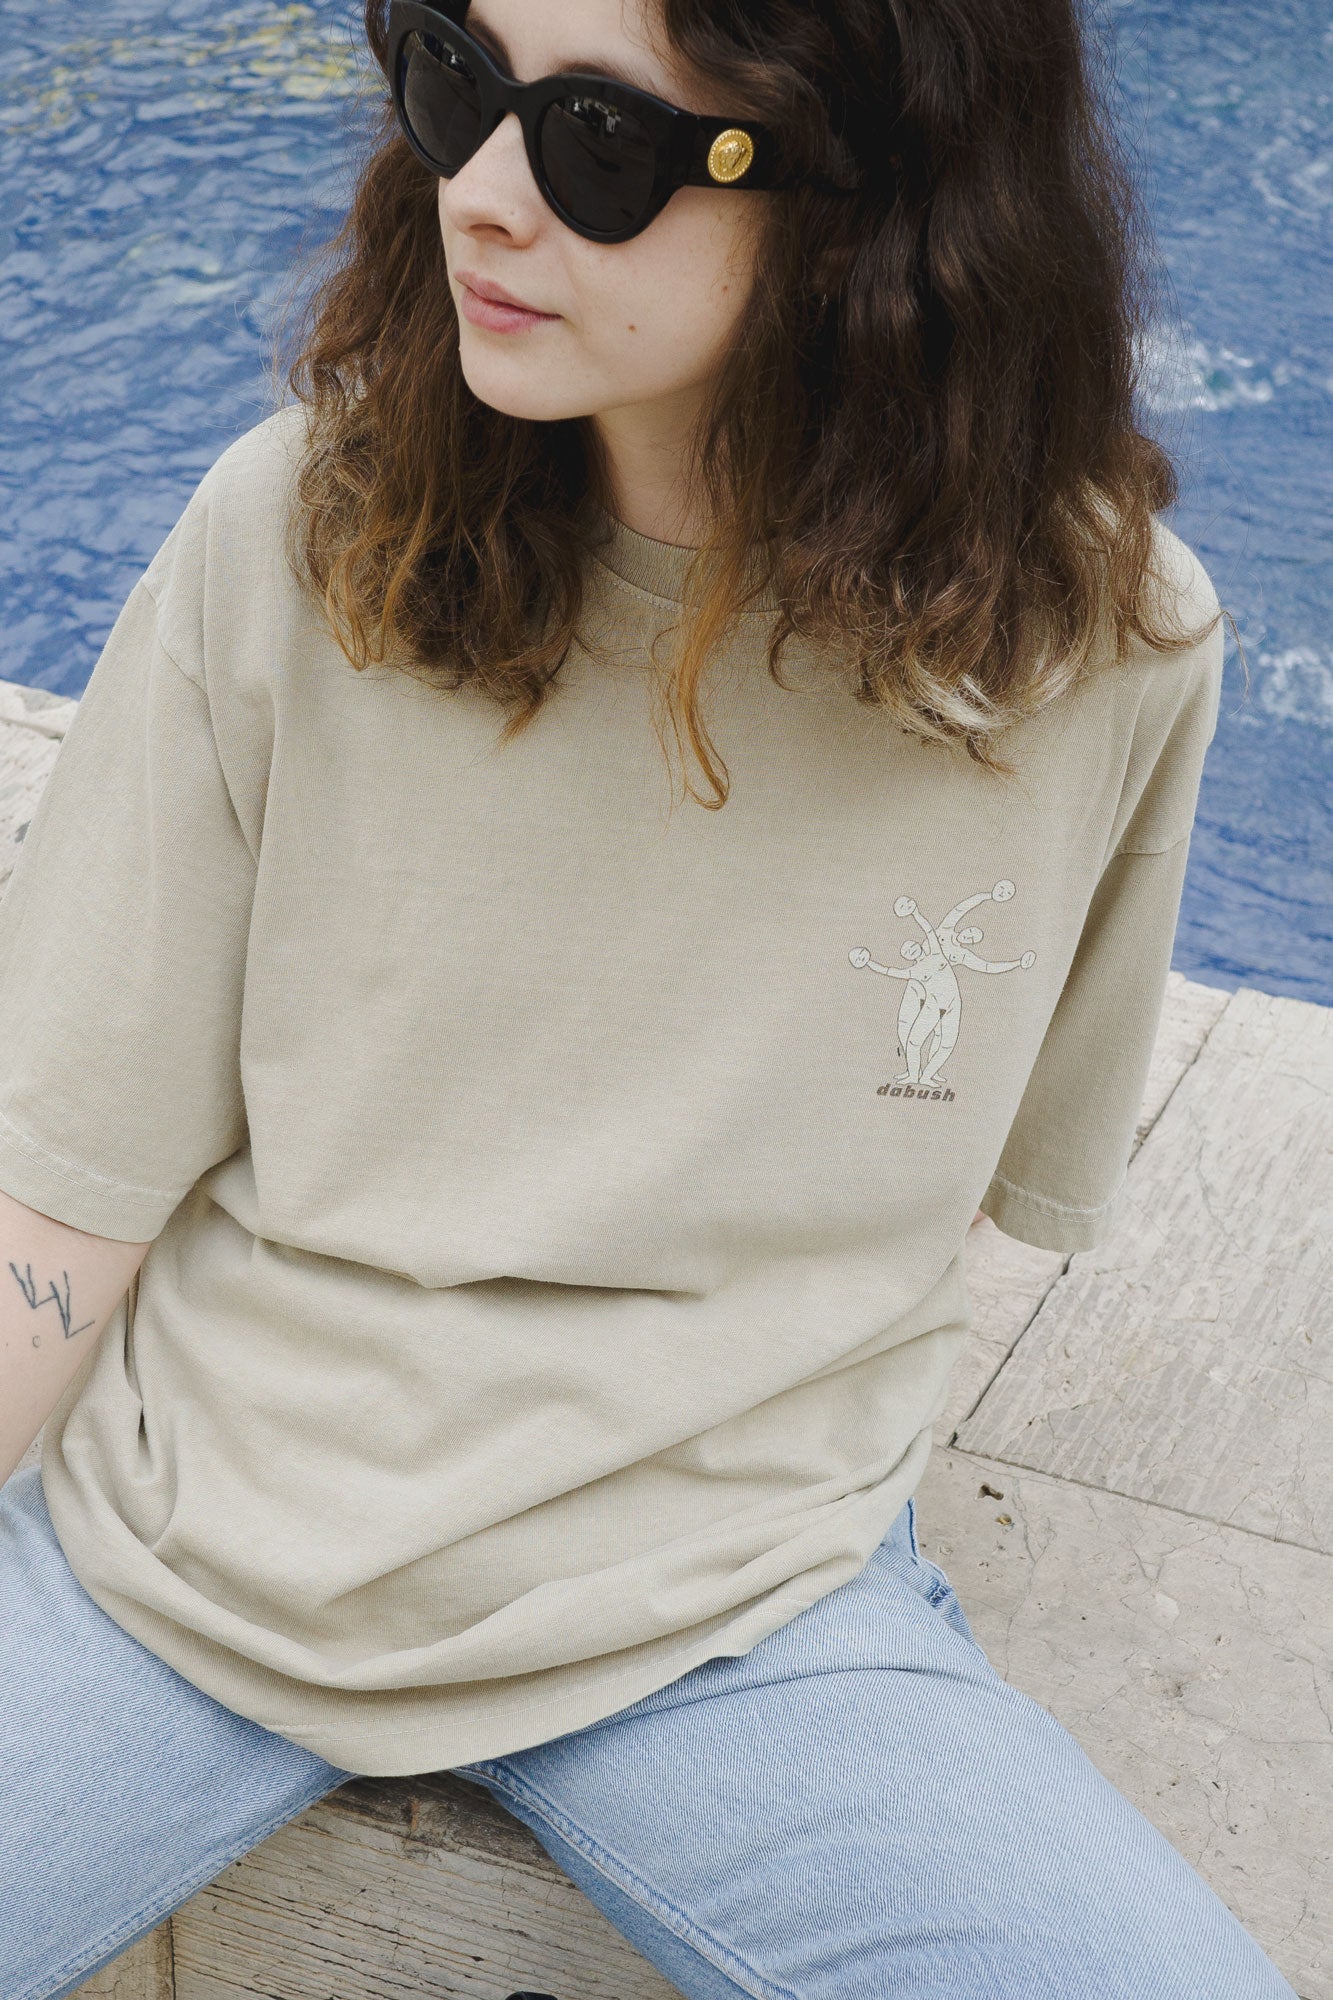 DABUSH SYNERGY T-SHIRT. TEAMWORK MAKES THE DREAM WORK. 100% Cotton, oversized tee with huge front and back print. Made in Tel aviv. Shop and view the latest Drops from the official DABUSH website. Worldwide Shipping.